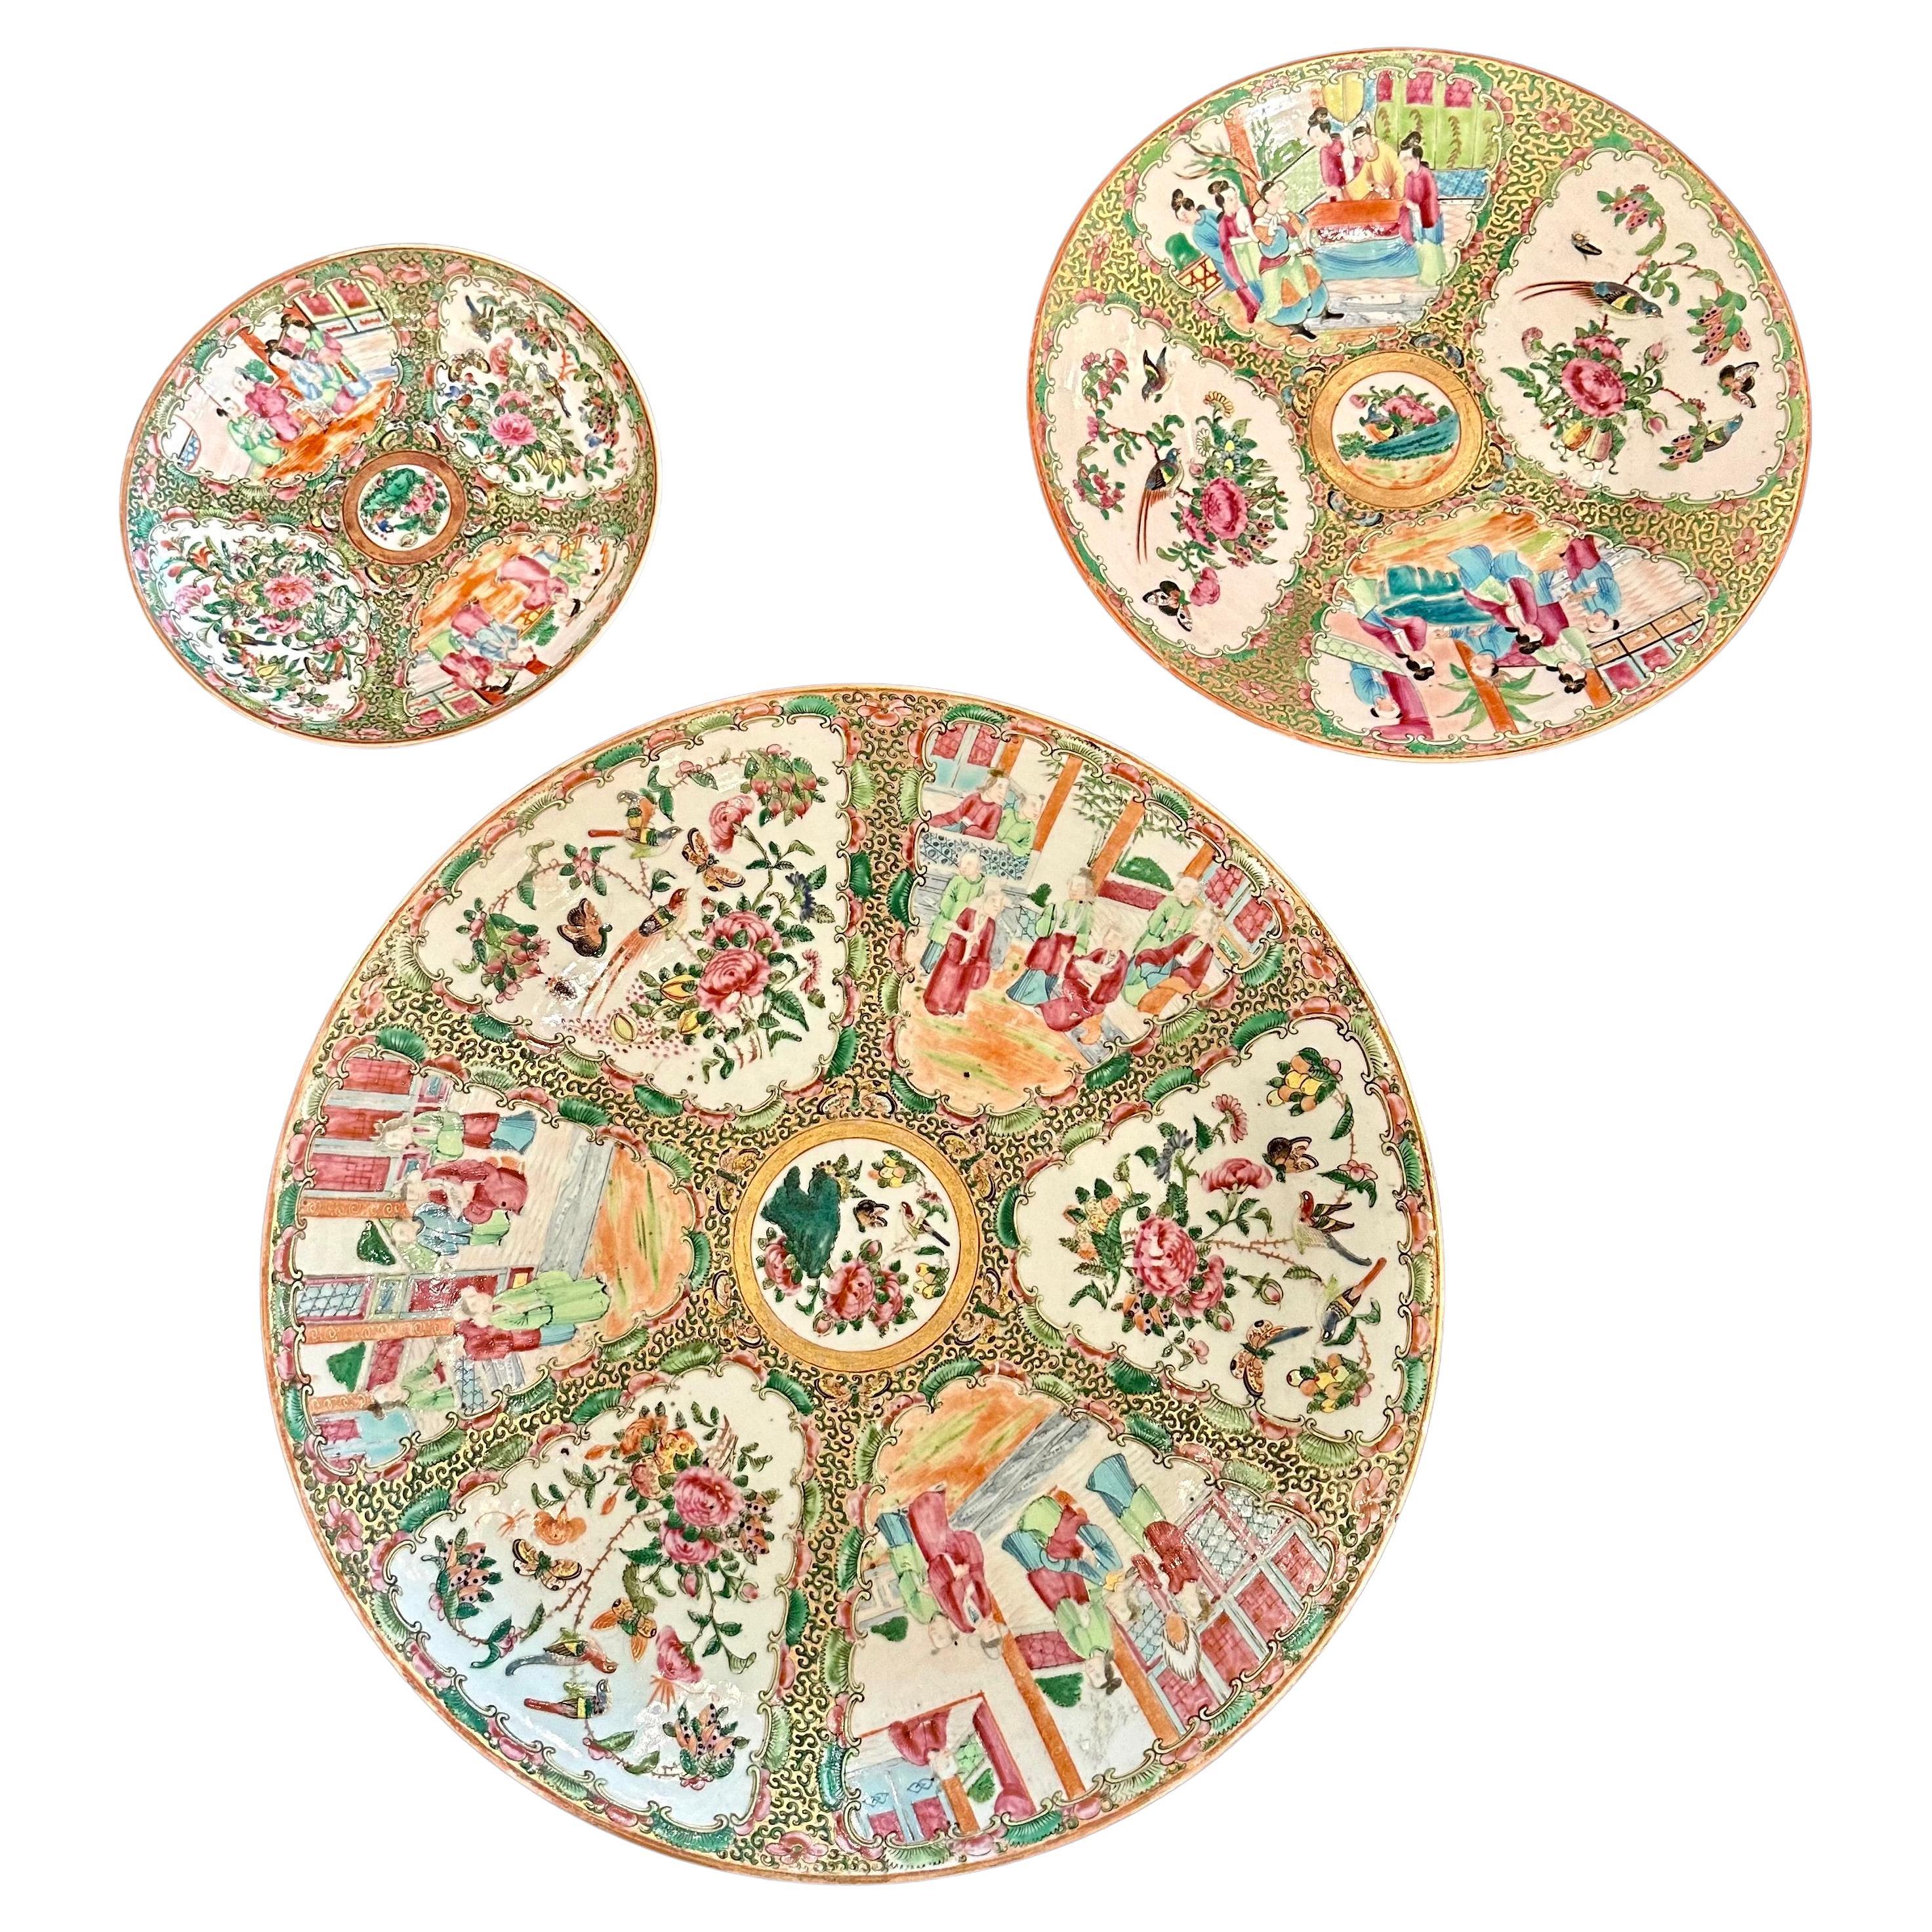 Special Listing for the Purchase of 3 Famille Rose Porcelain Plates at Once. For Sale